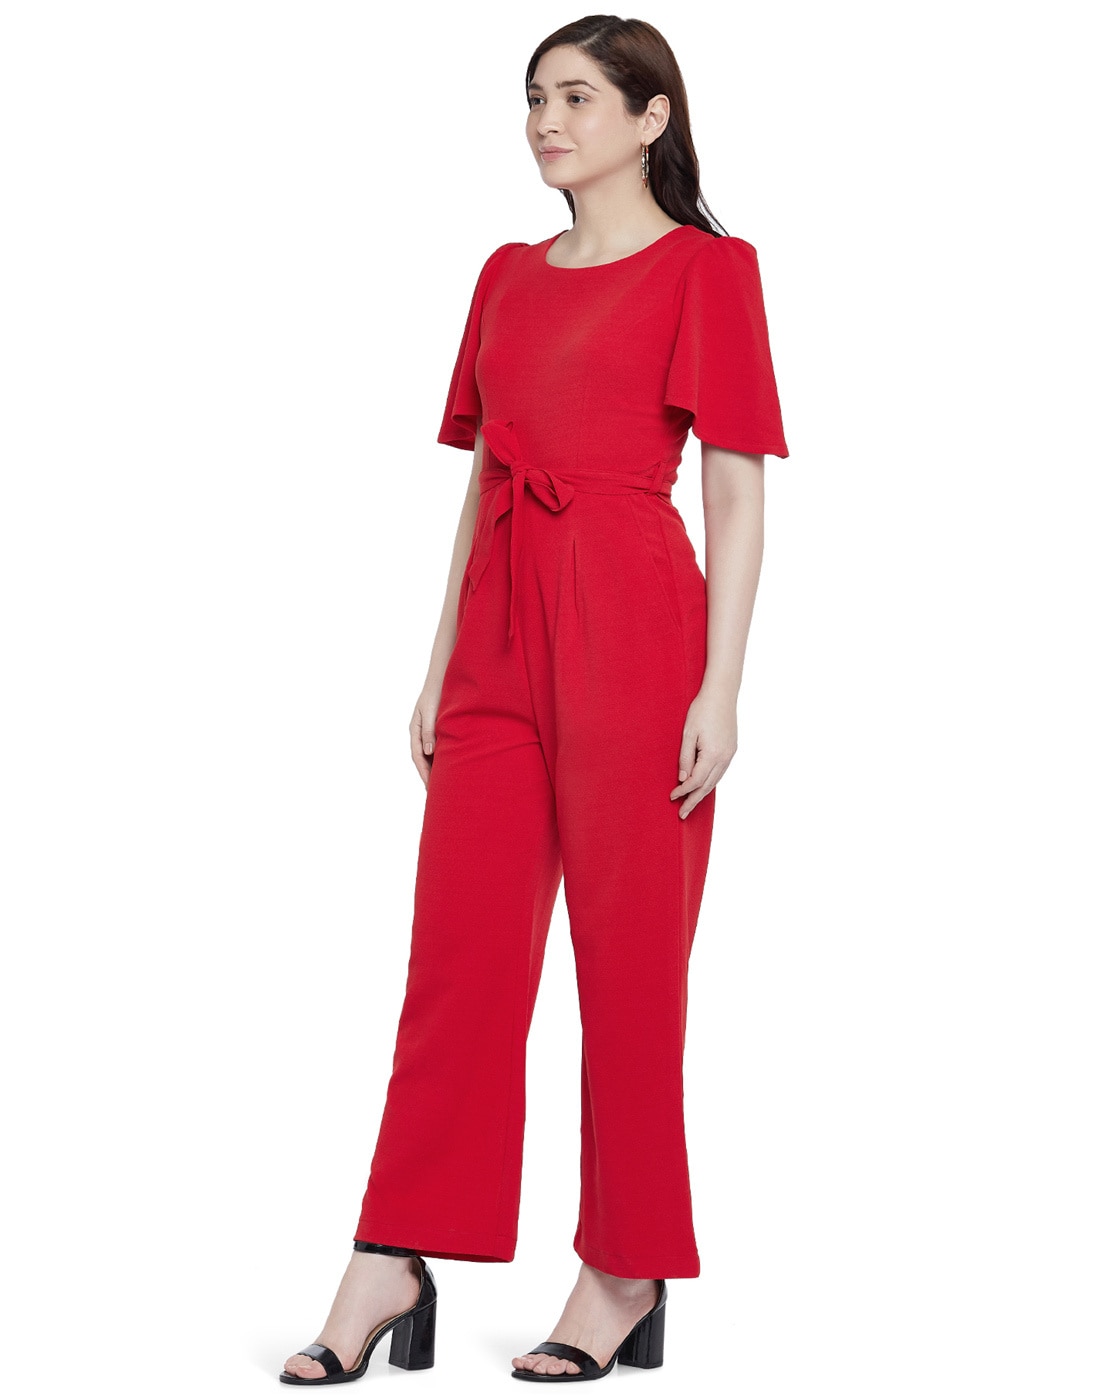 Details more than 245 red jumpsuit with sleeves super hot